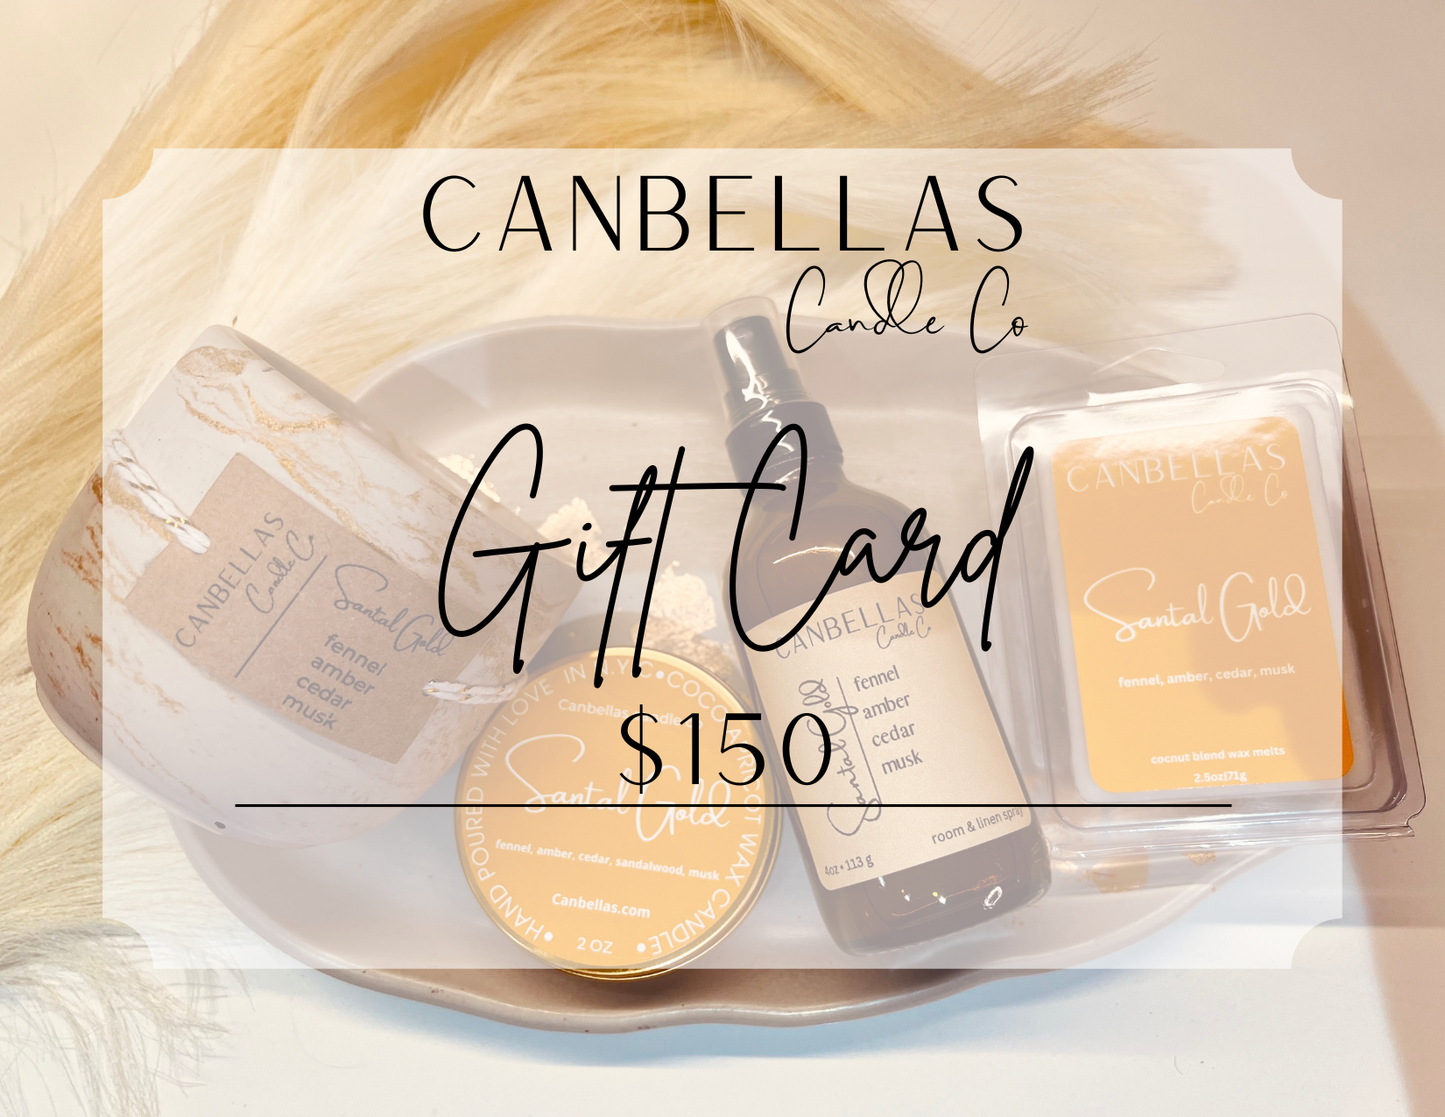 Canbellas Candle Co. Gift Card